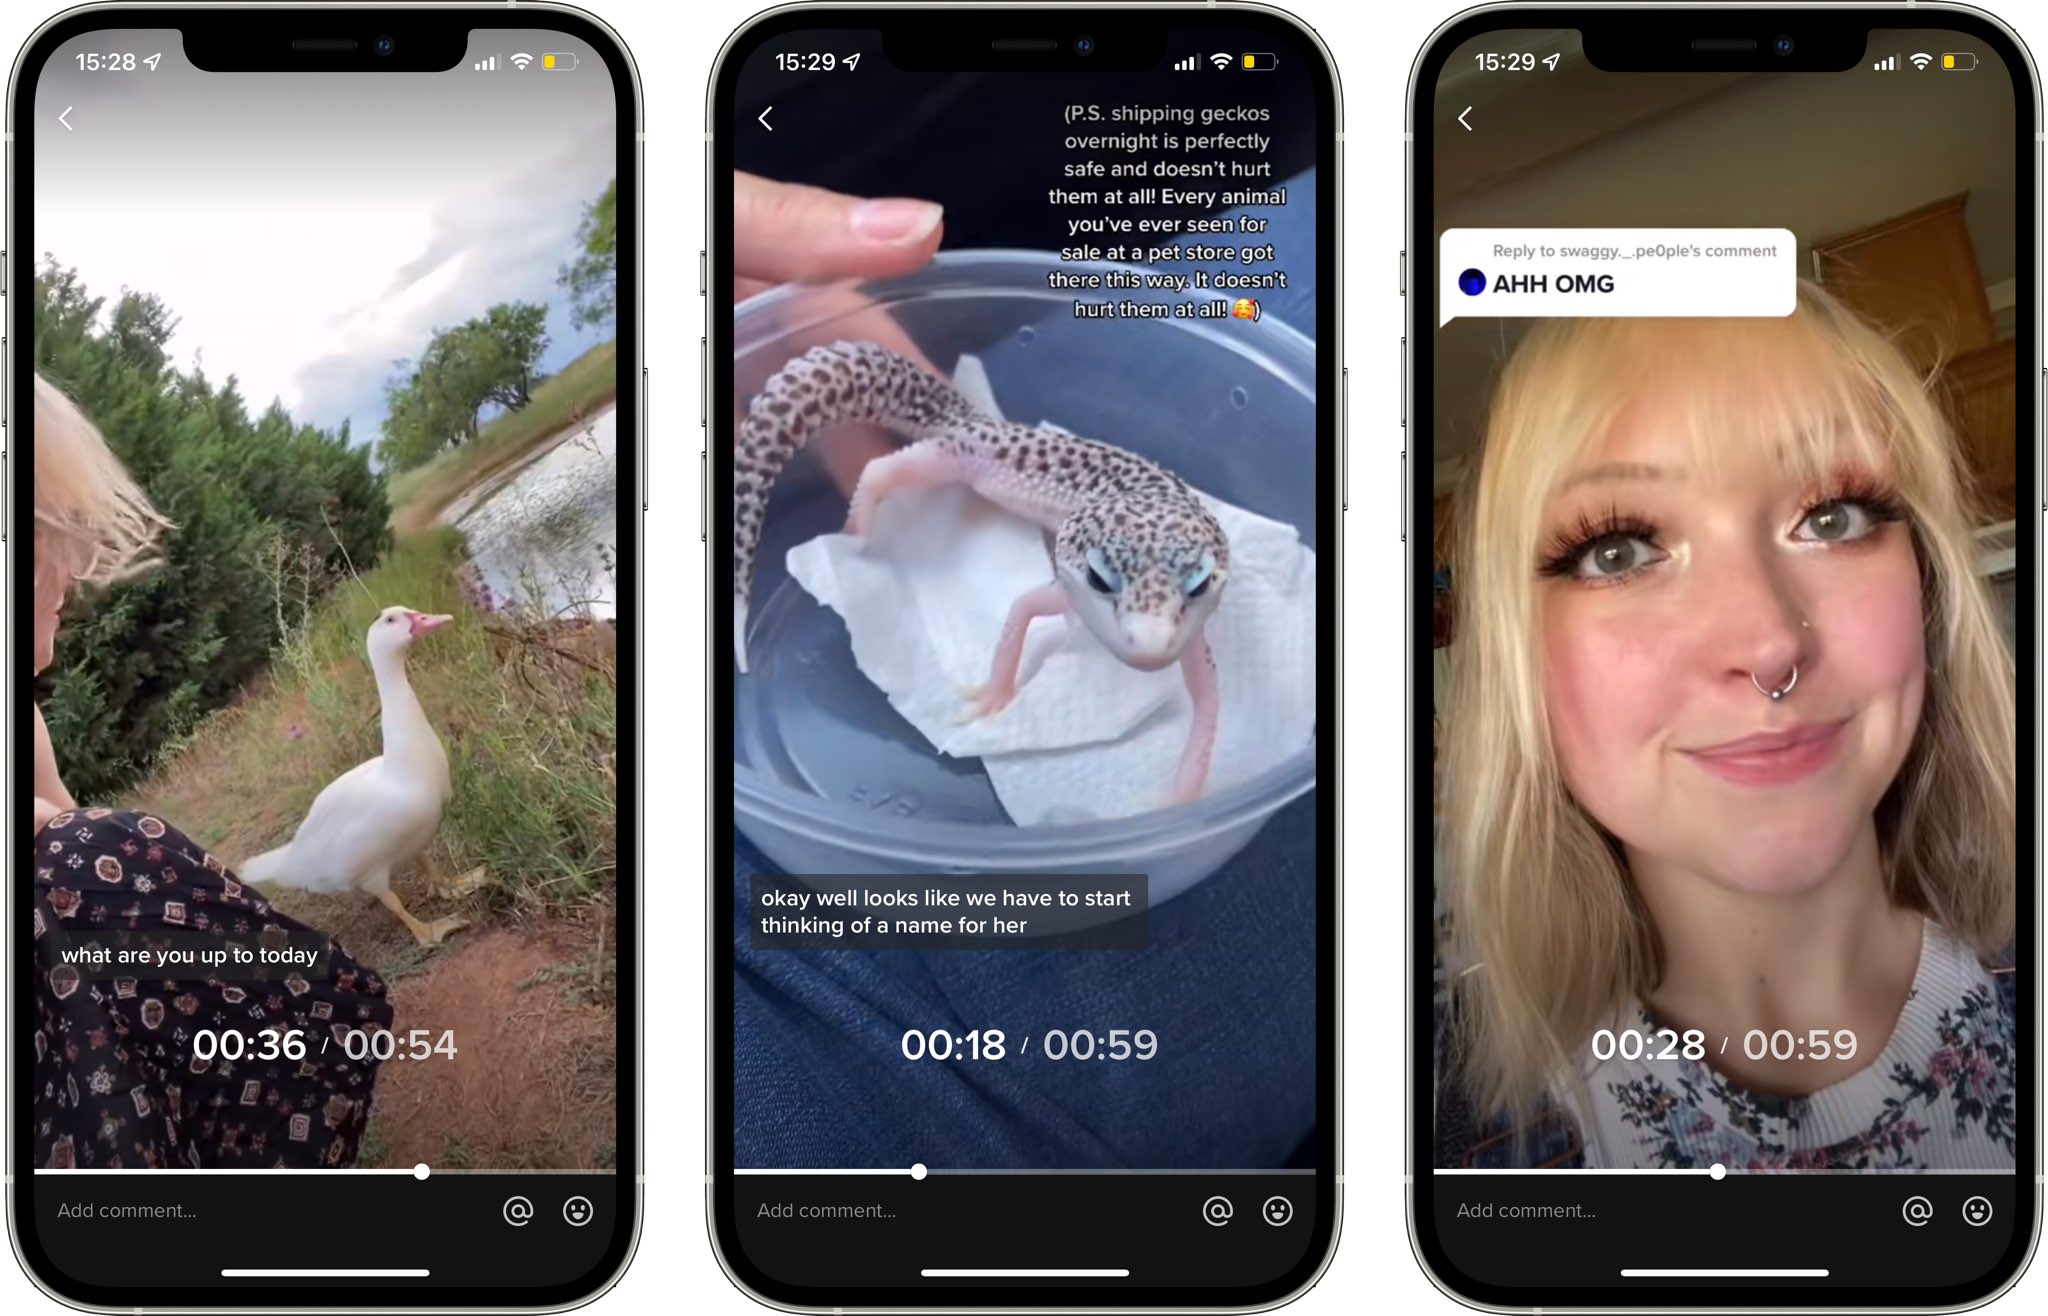 iPhone screenshots showing TikTok video navigation with the scrubber used to fast-forward and backward